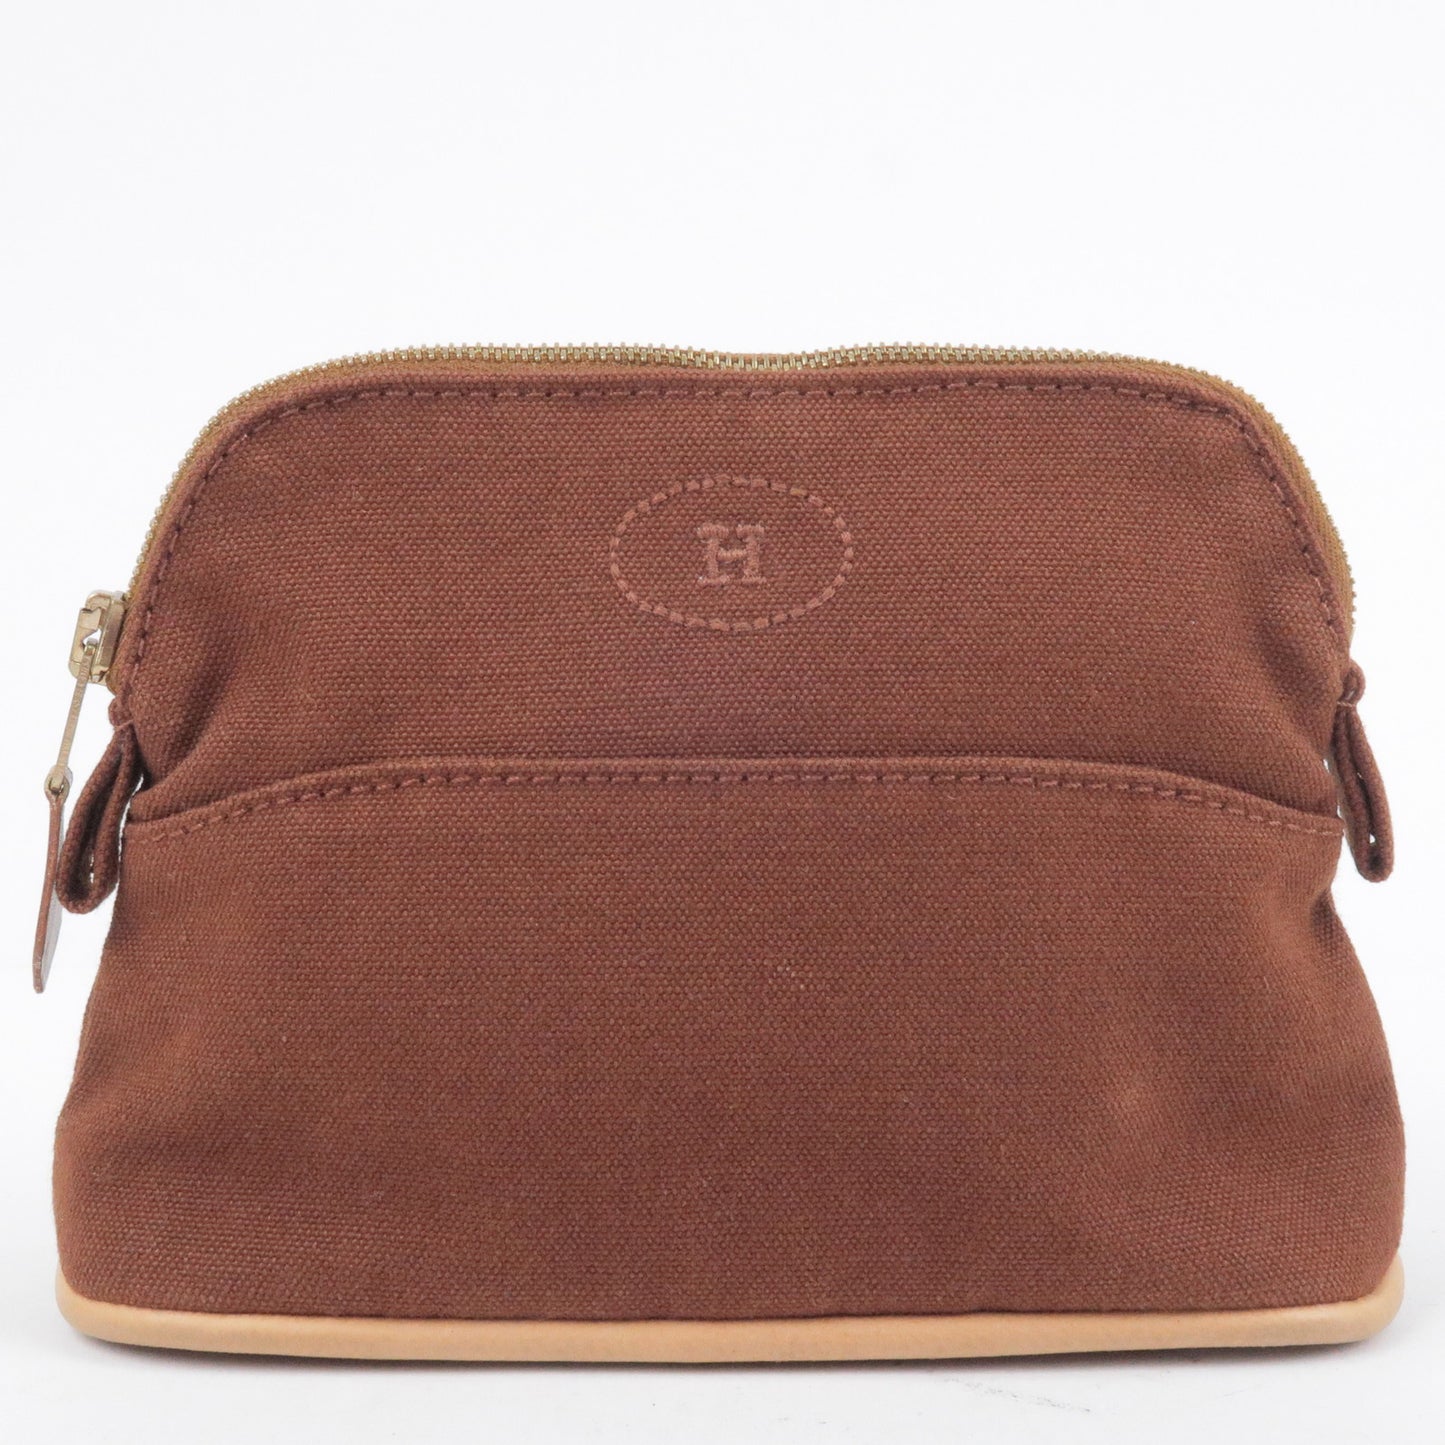 HERMES Canvas Leather Bolide Pouch Mini Brown